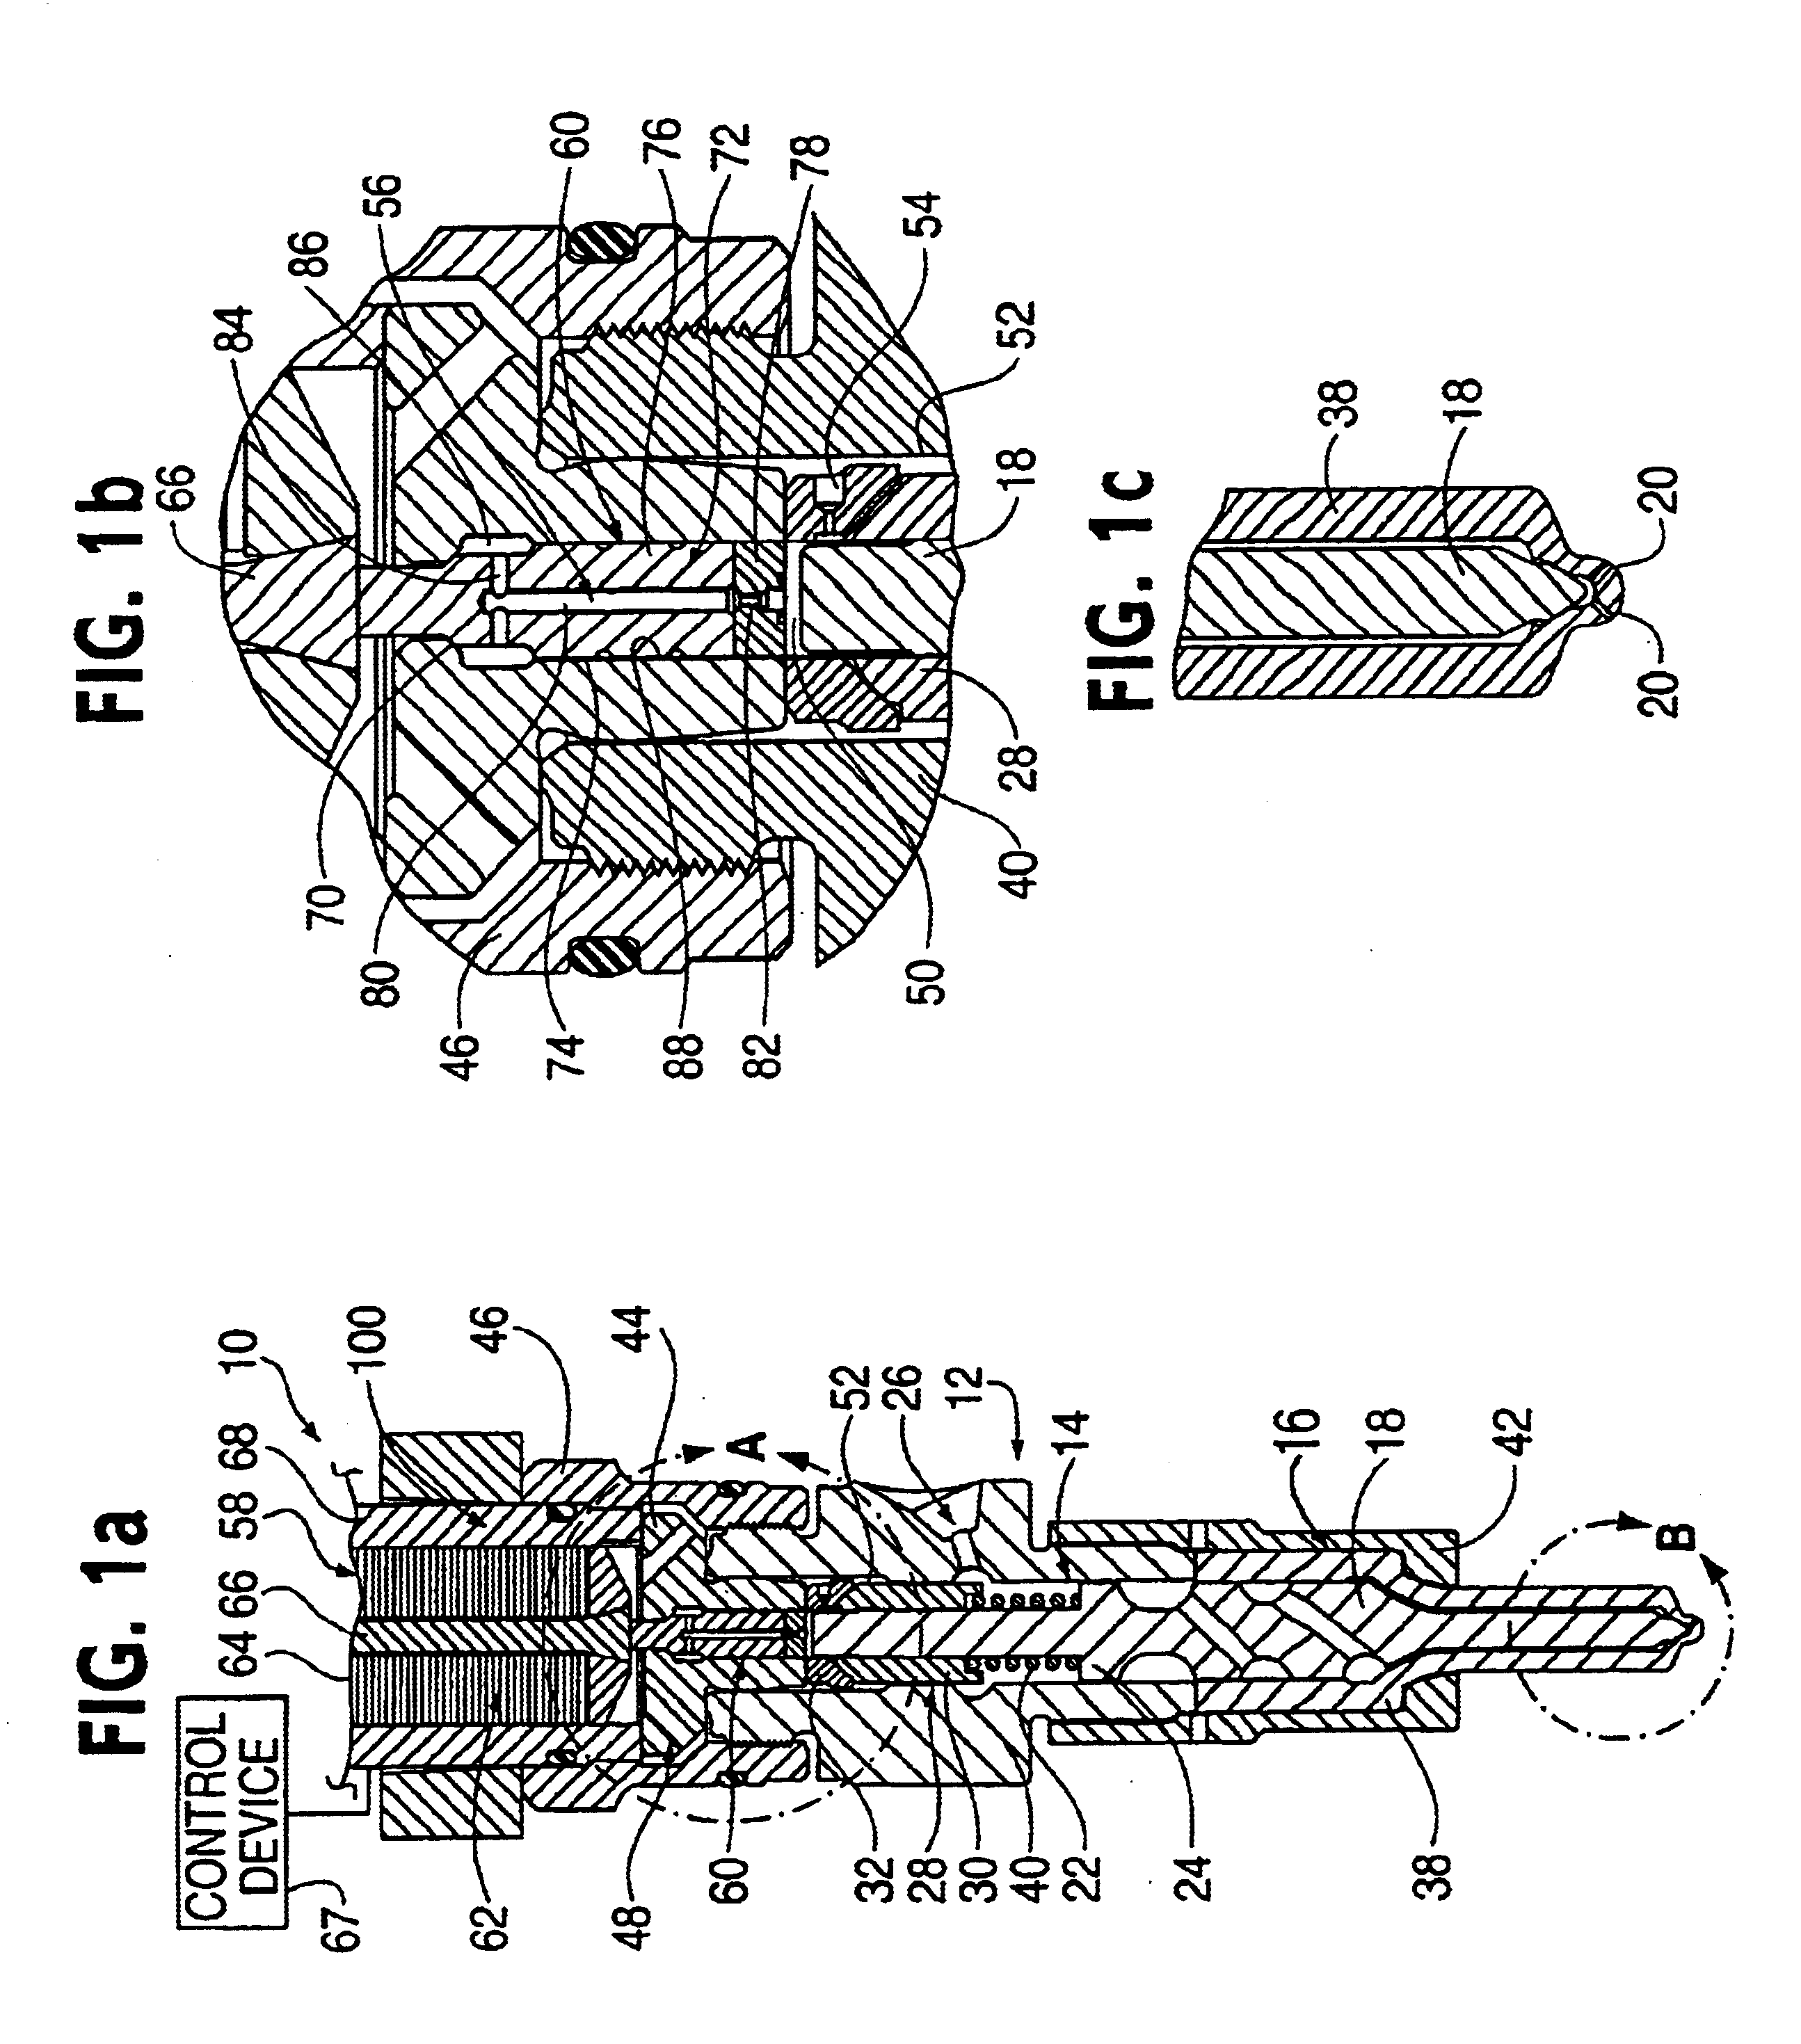 Fuel injector with feedback control